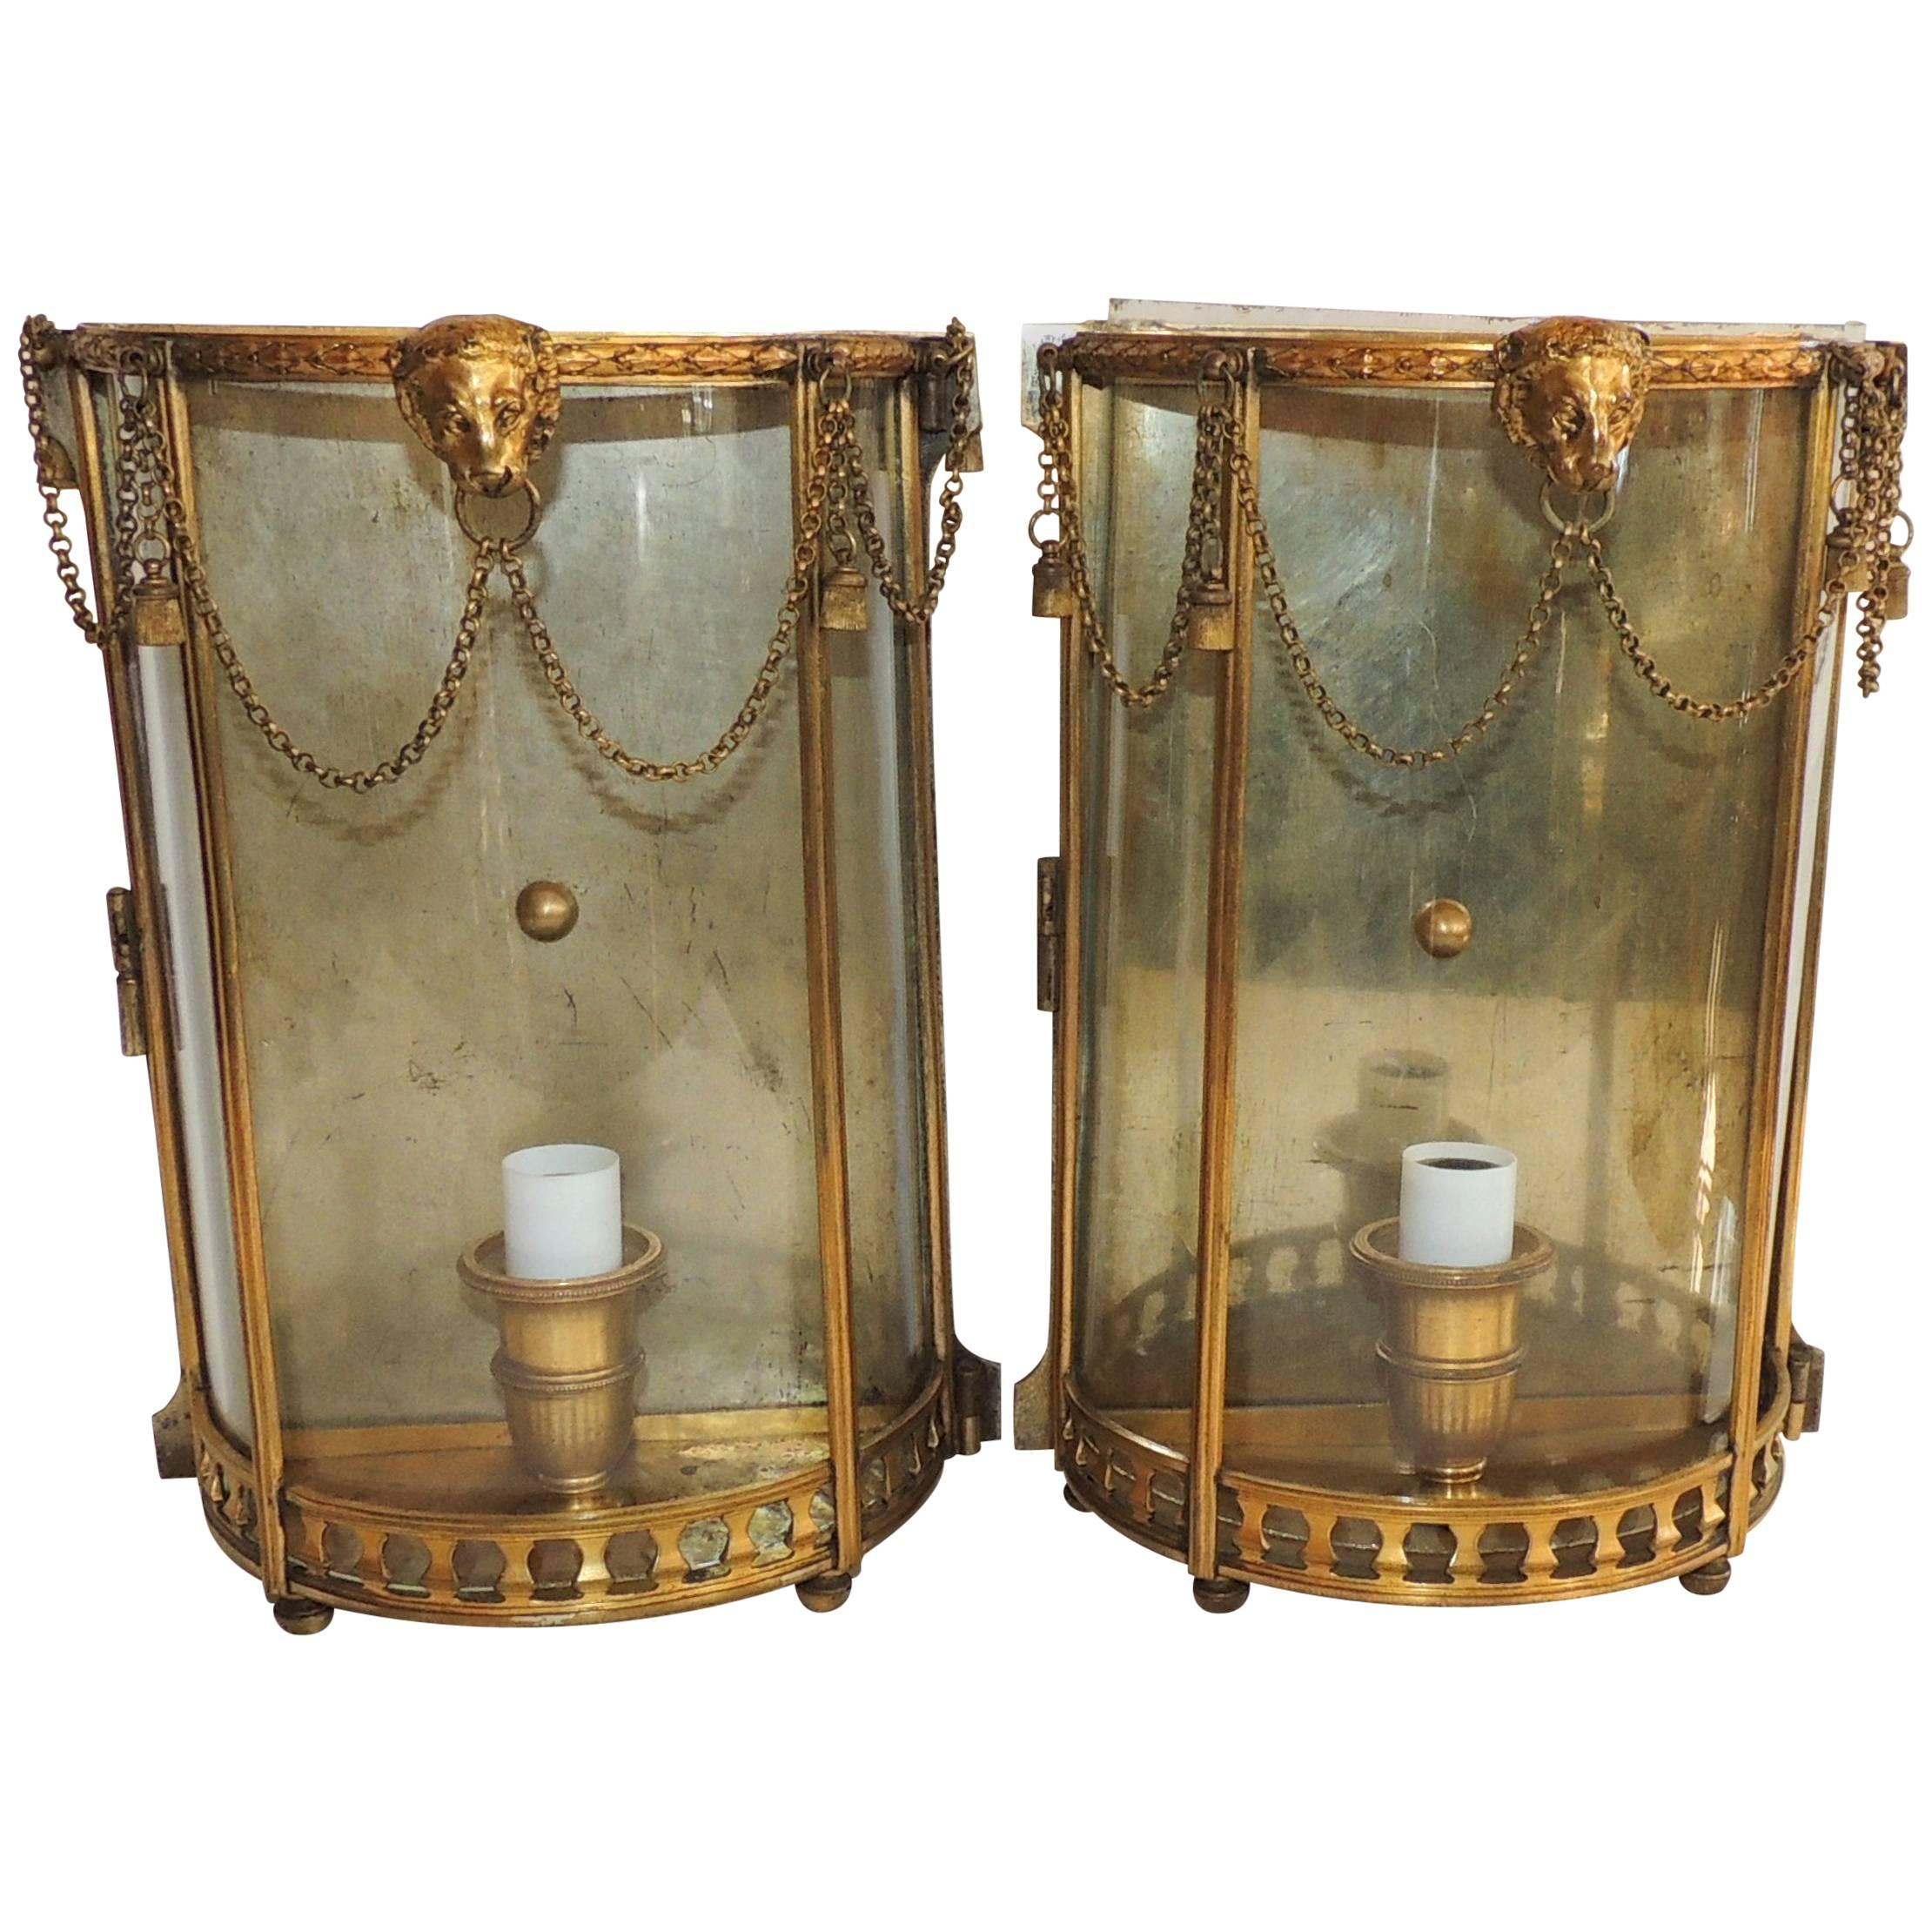 Handsome French Pair Neoclassical Lion Glass Tassel Swag Caldwell Wall Sconces